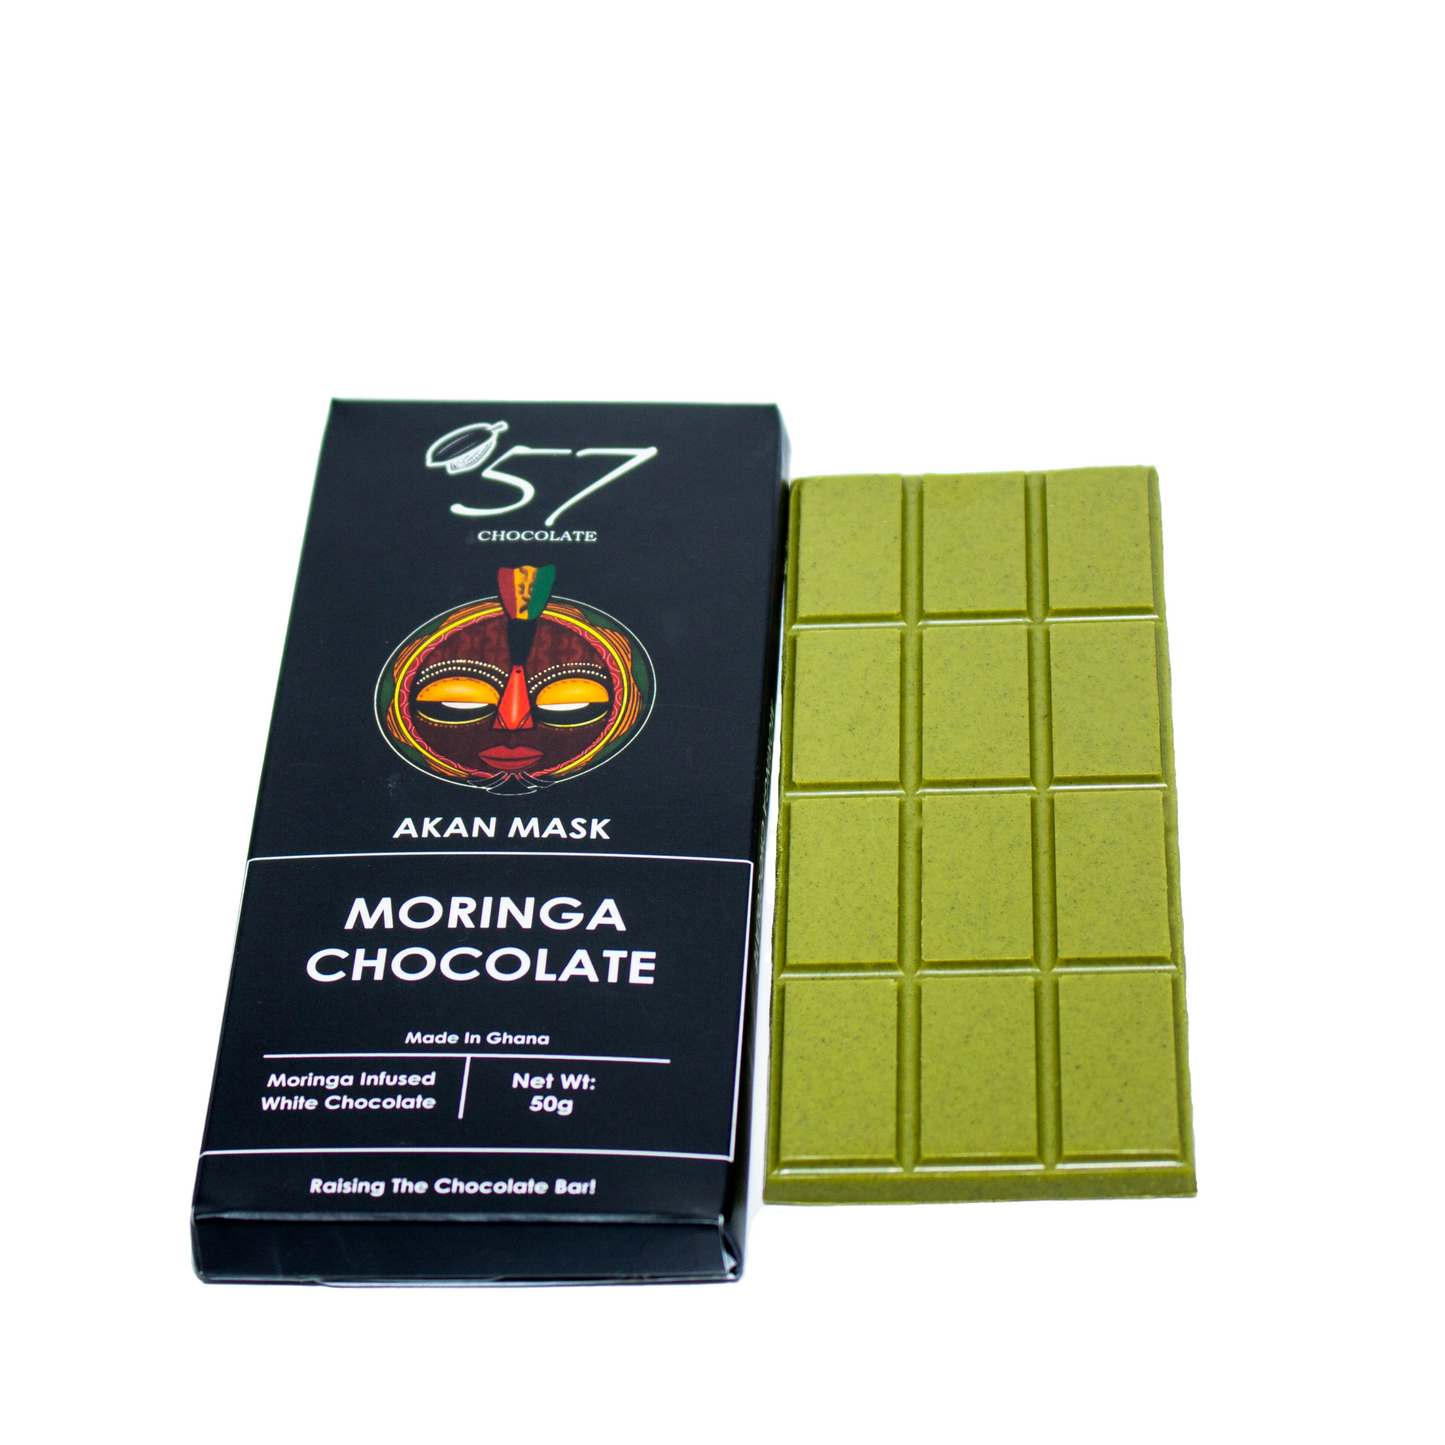 White chocolate infused with moringa by '57 Chocolate